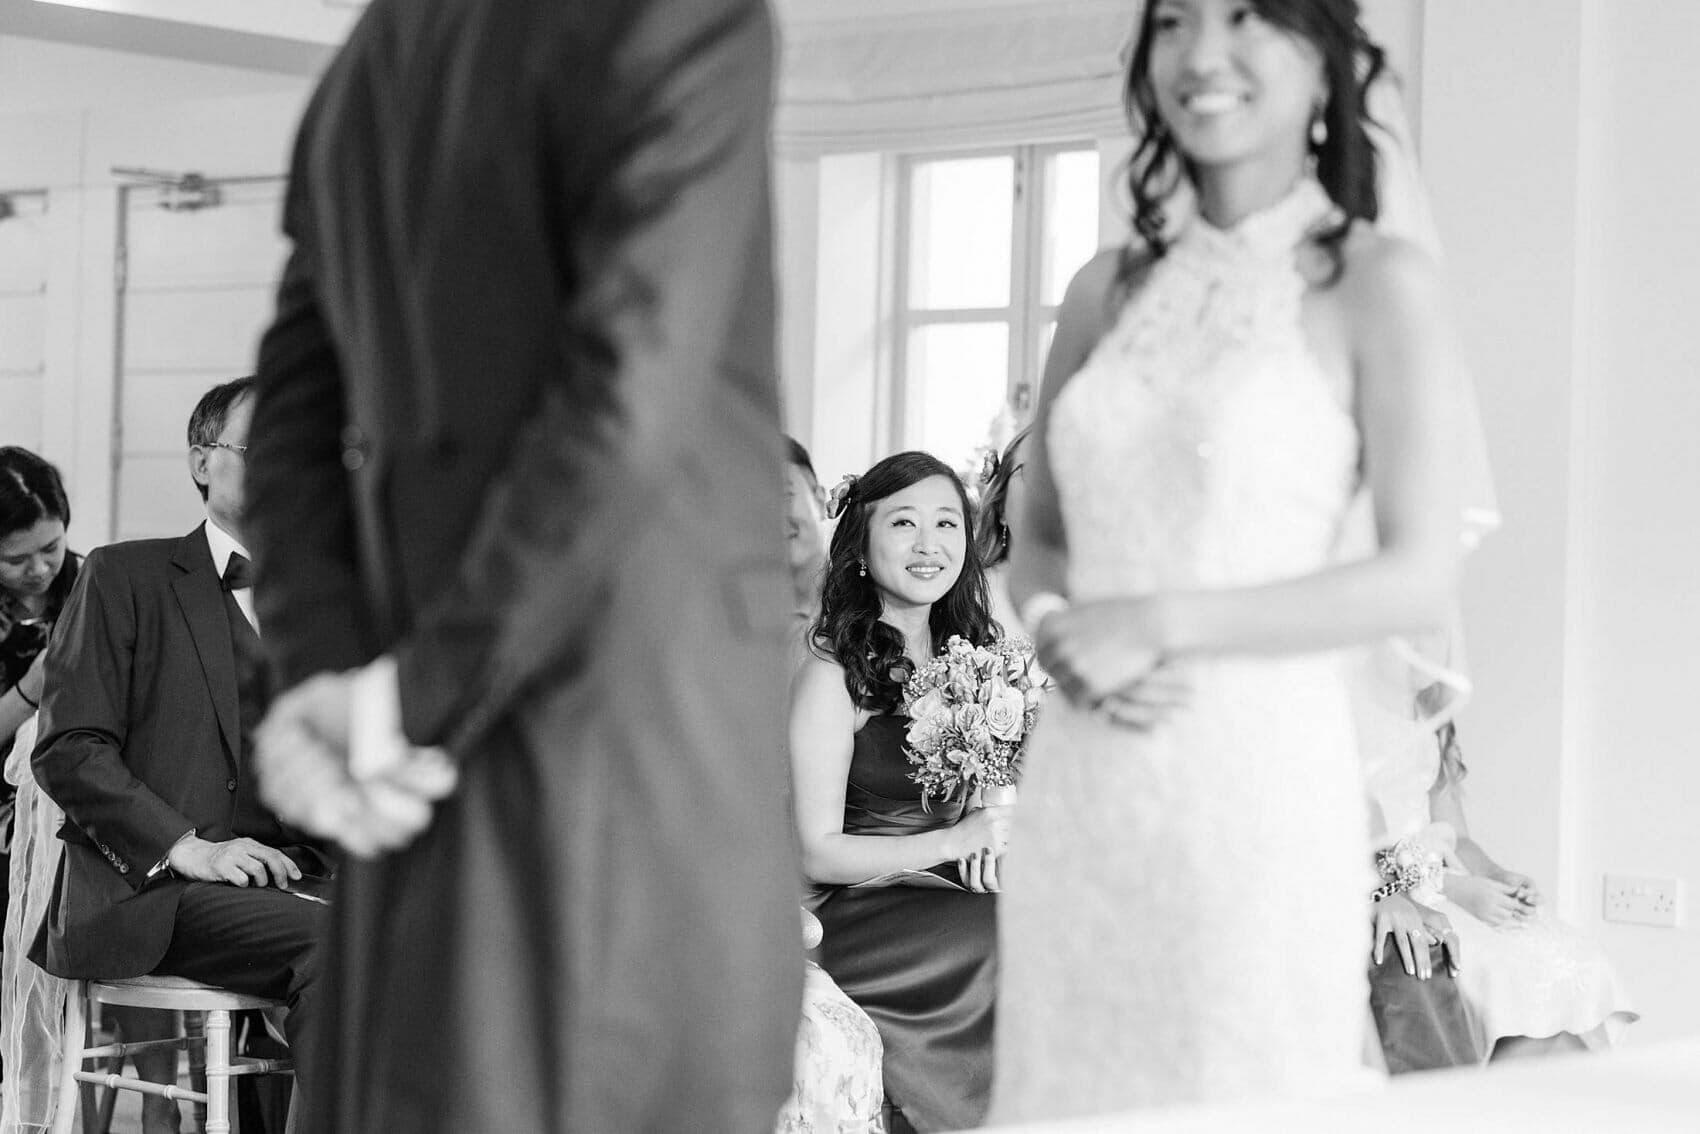 Bridemaid smiles at couple in wedding ceremony